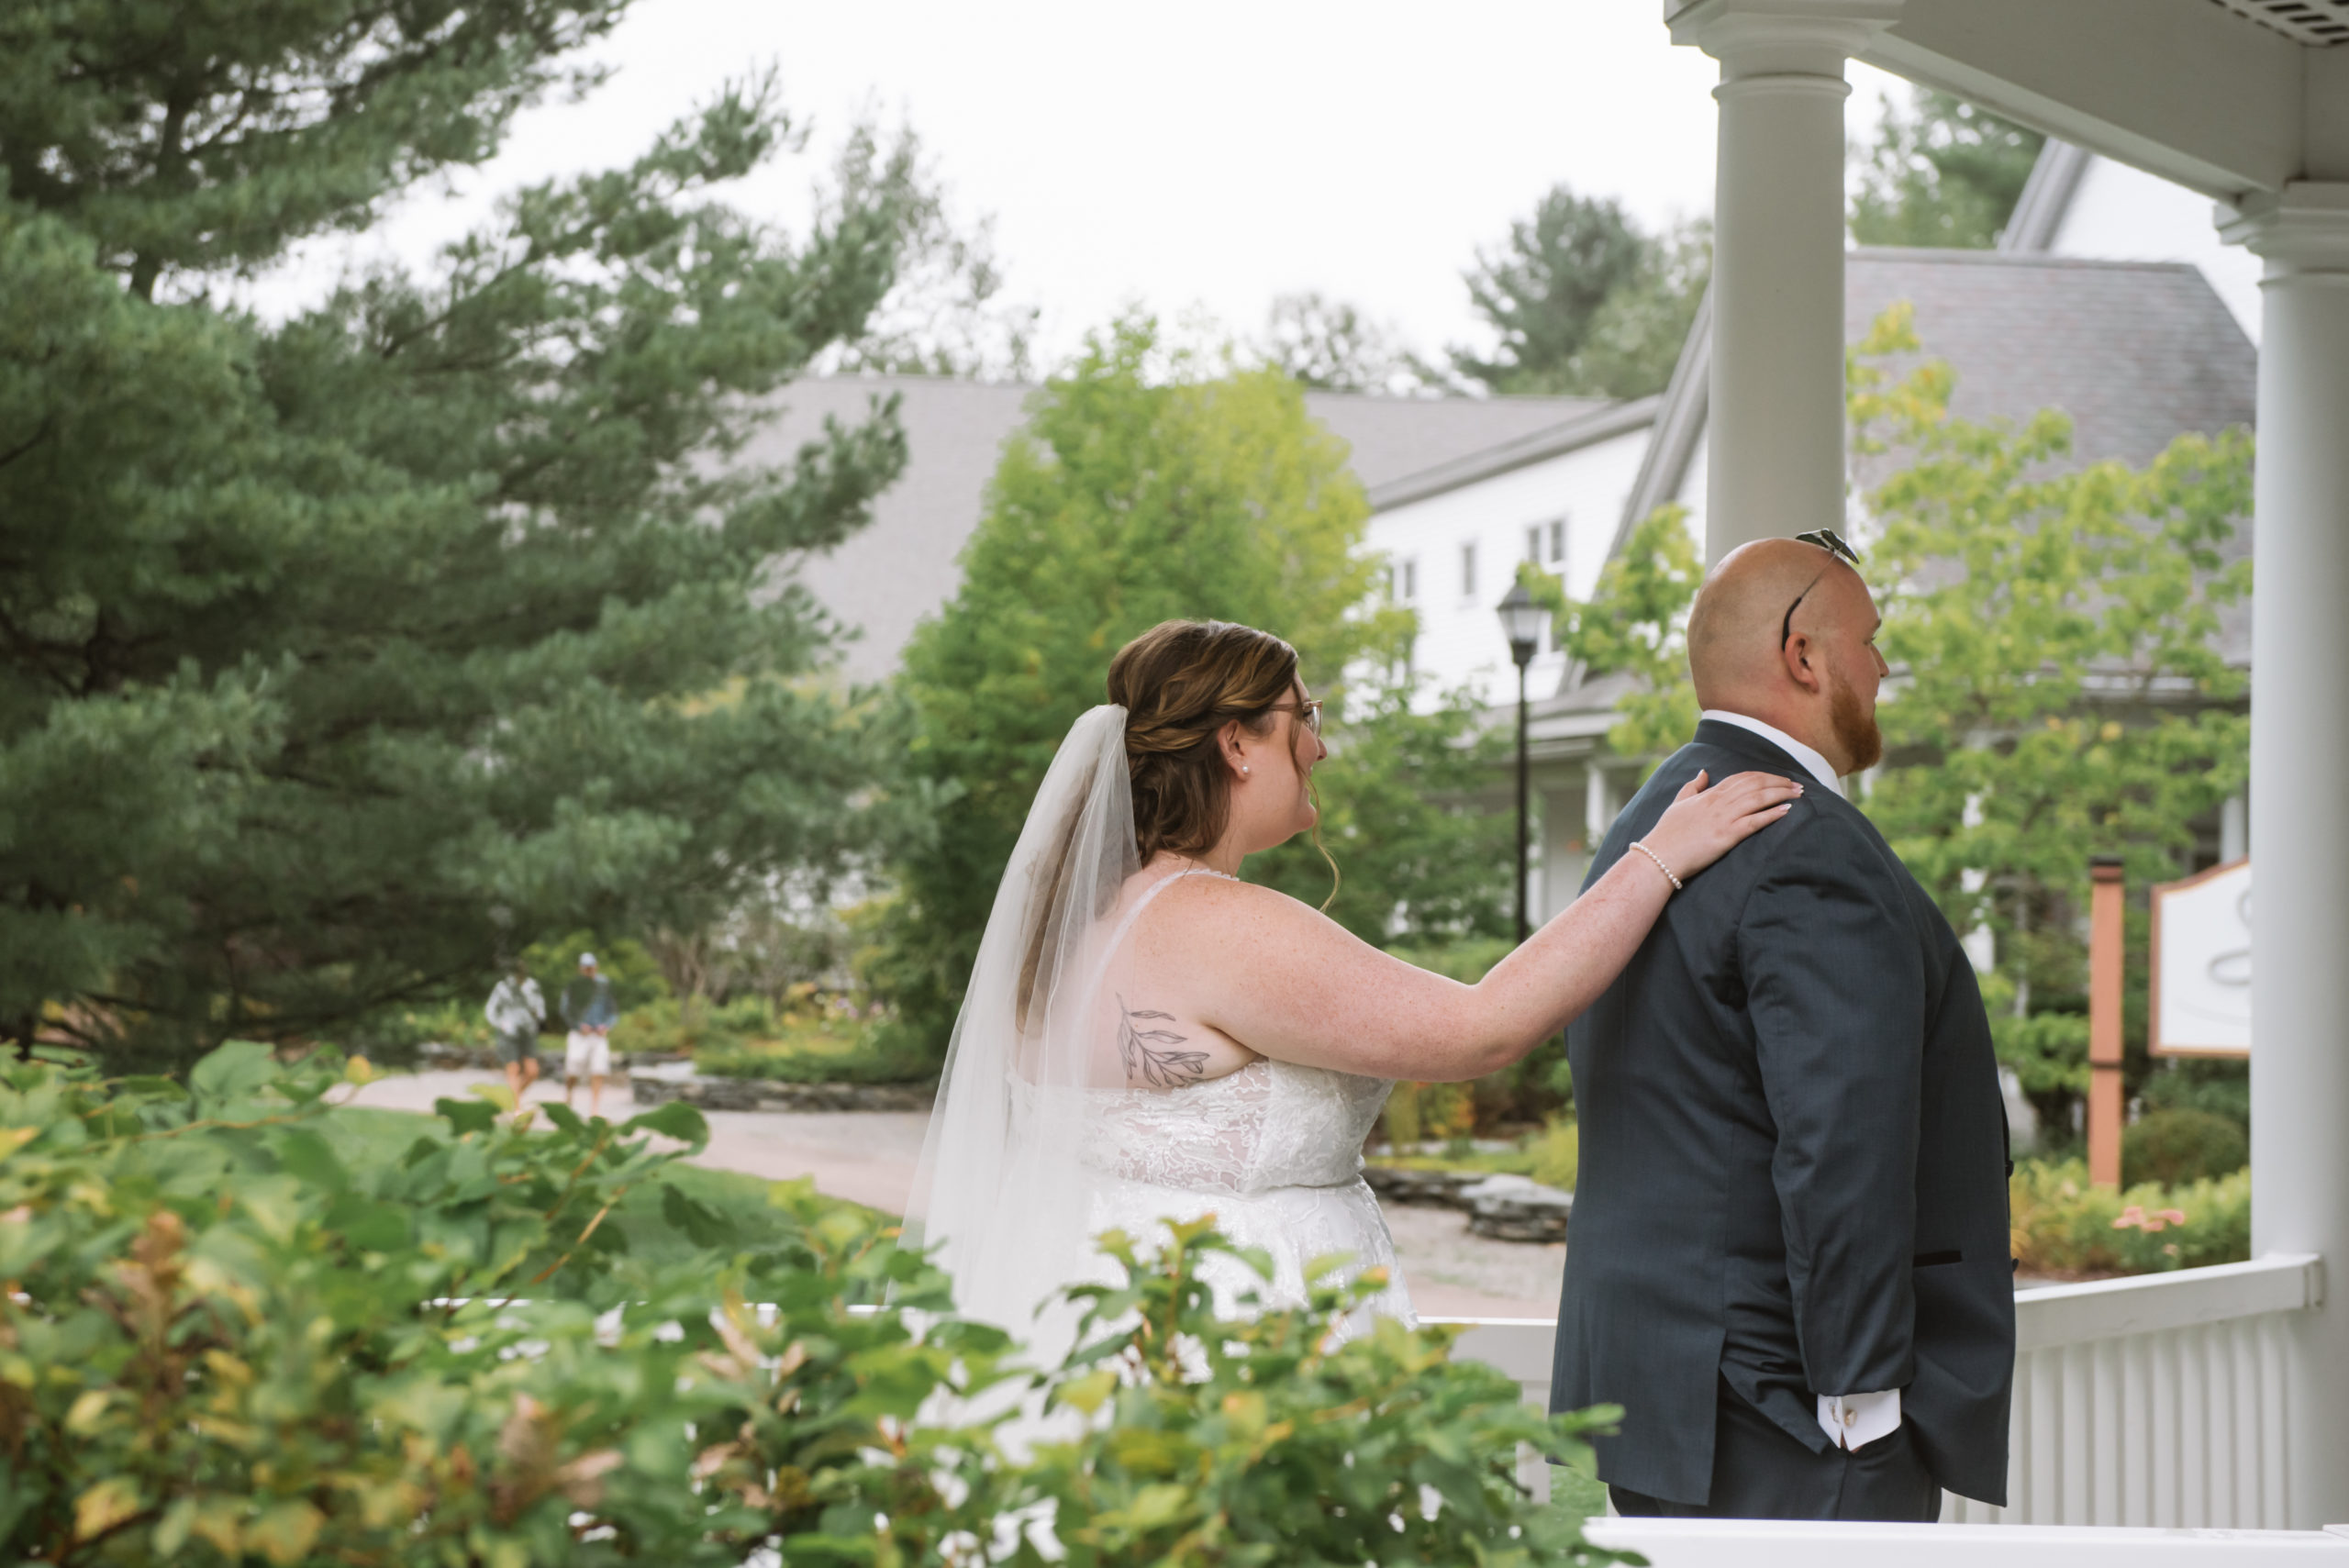 Bride standing behind her groom with her right hand on his right shoulder about to have the first look. His sunglasses are atop his head. They are standing in a covered walkway with bushes/greenery in the foreground and trees in the background. She is wearing a long white lace gown with a long veil and he is wearing a blue suit. 